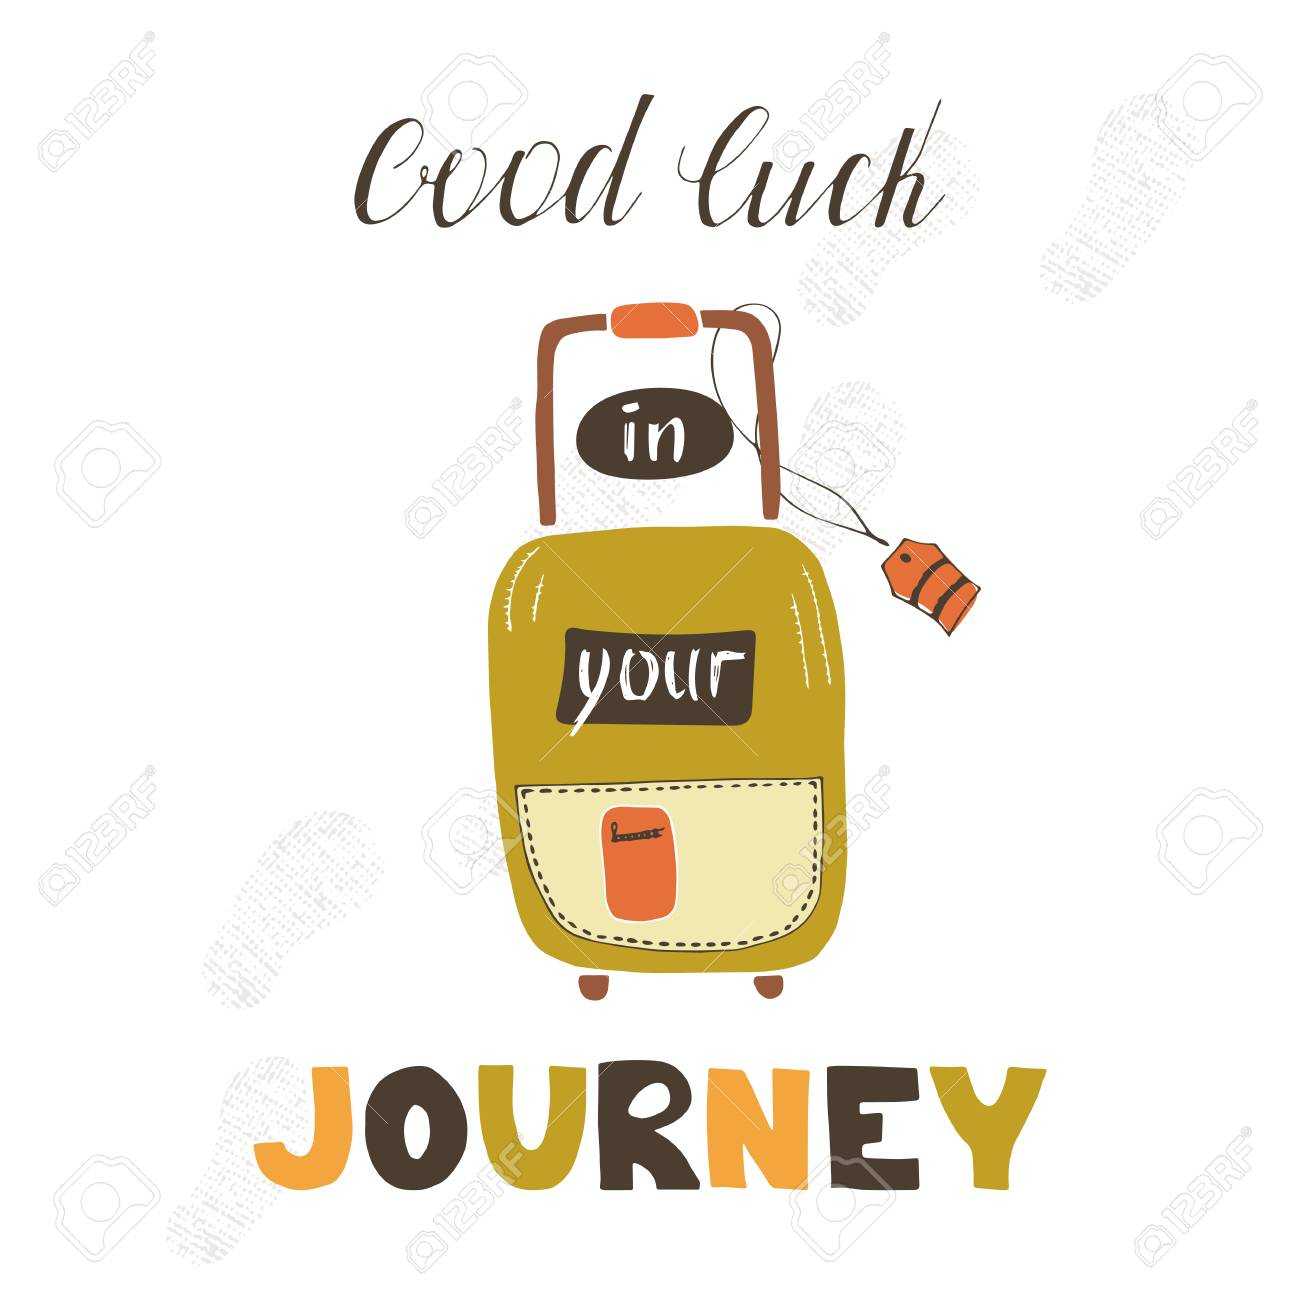 Travel Card Template With Suitcase. Greeting Postcard With Hand.. Intended For Good Luck Banner Template